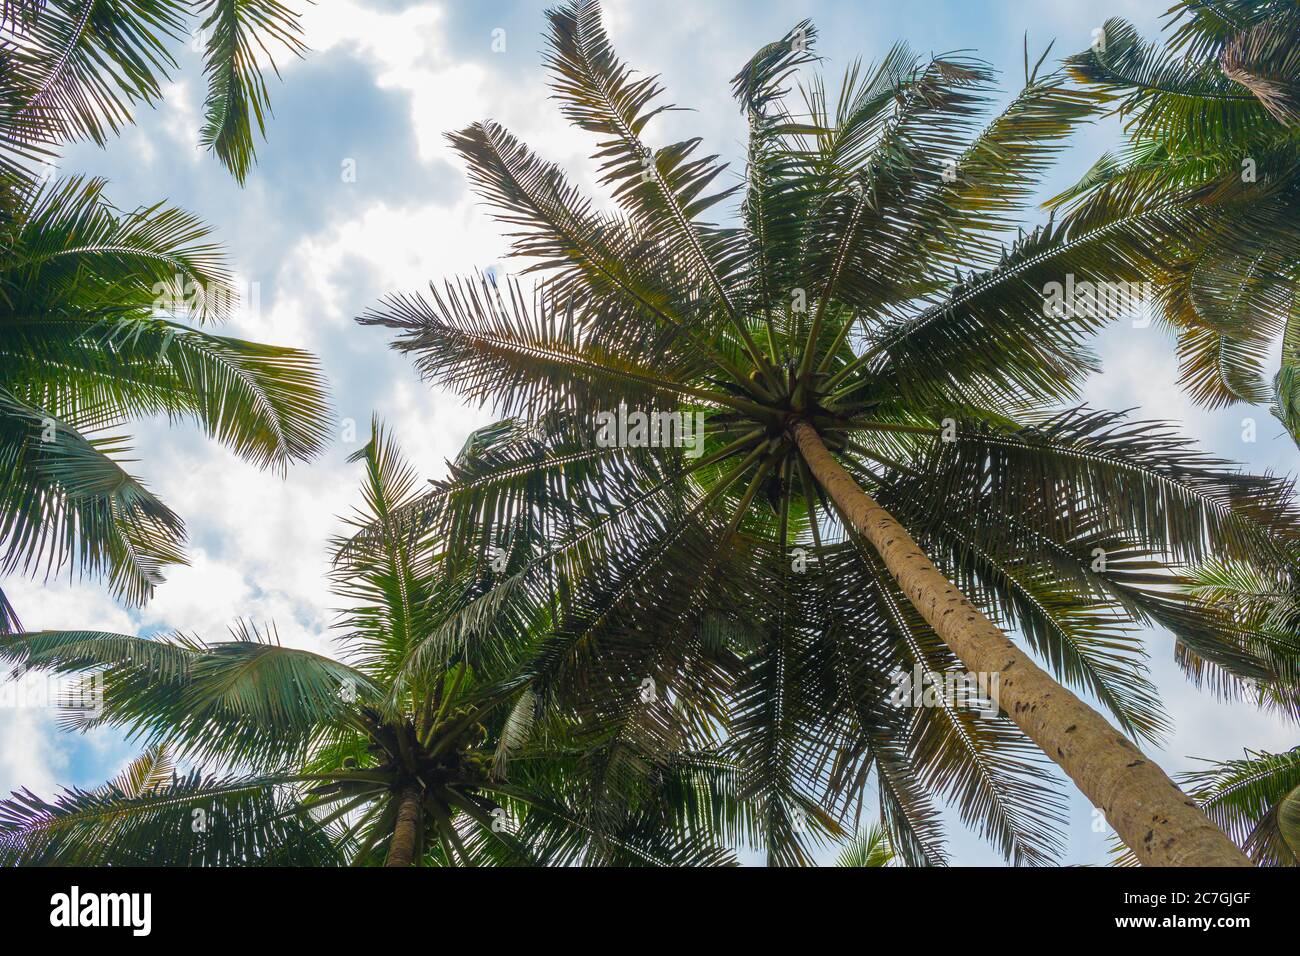 A view up at palm trees against blue skies Stock Photo